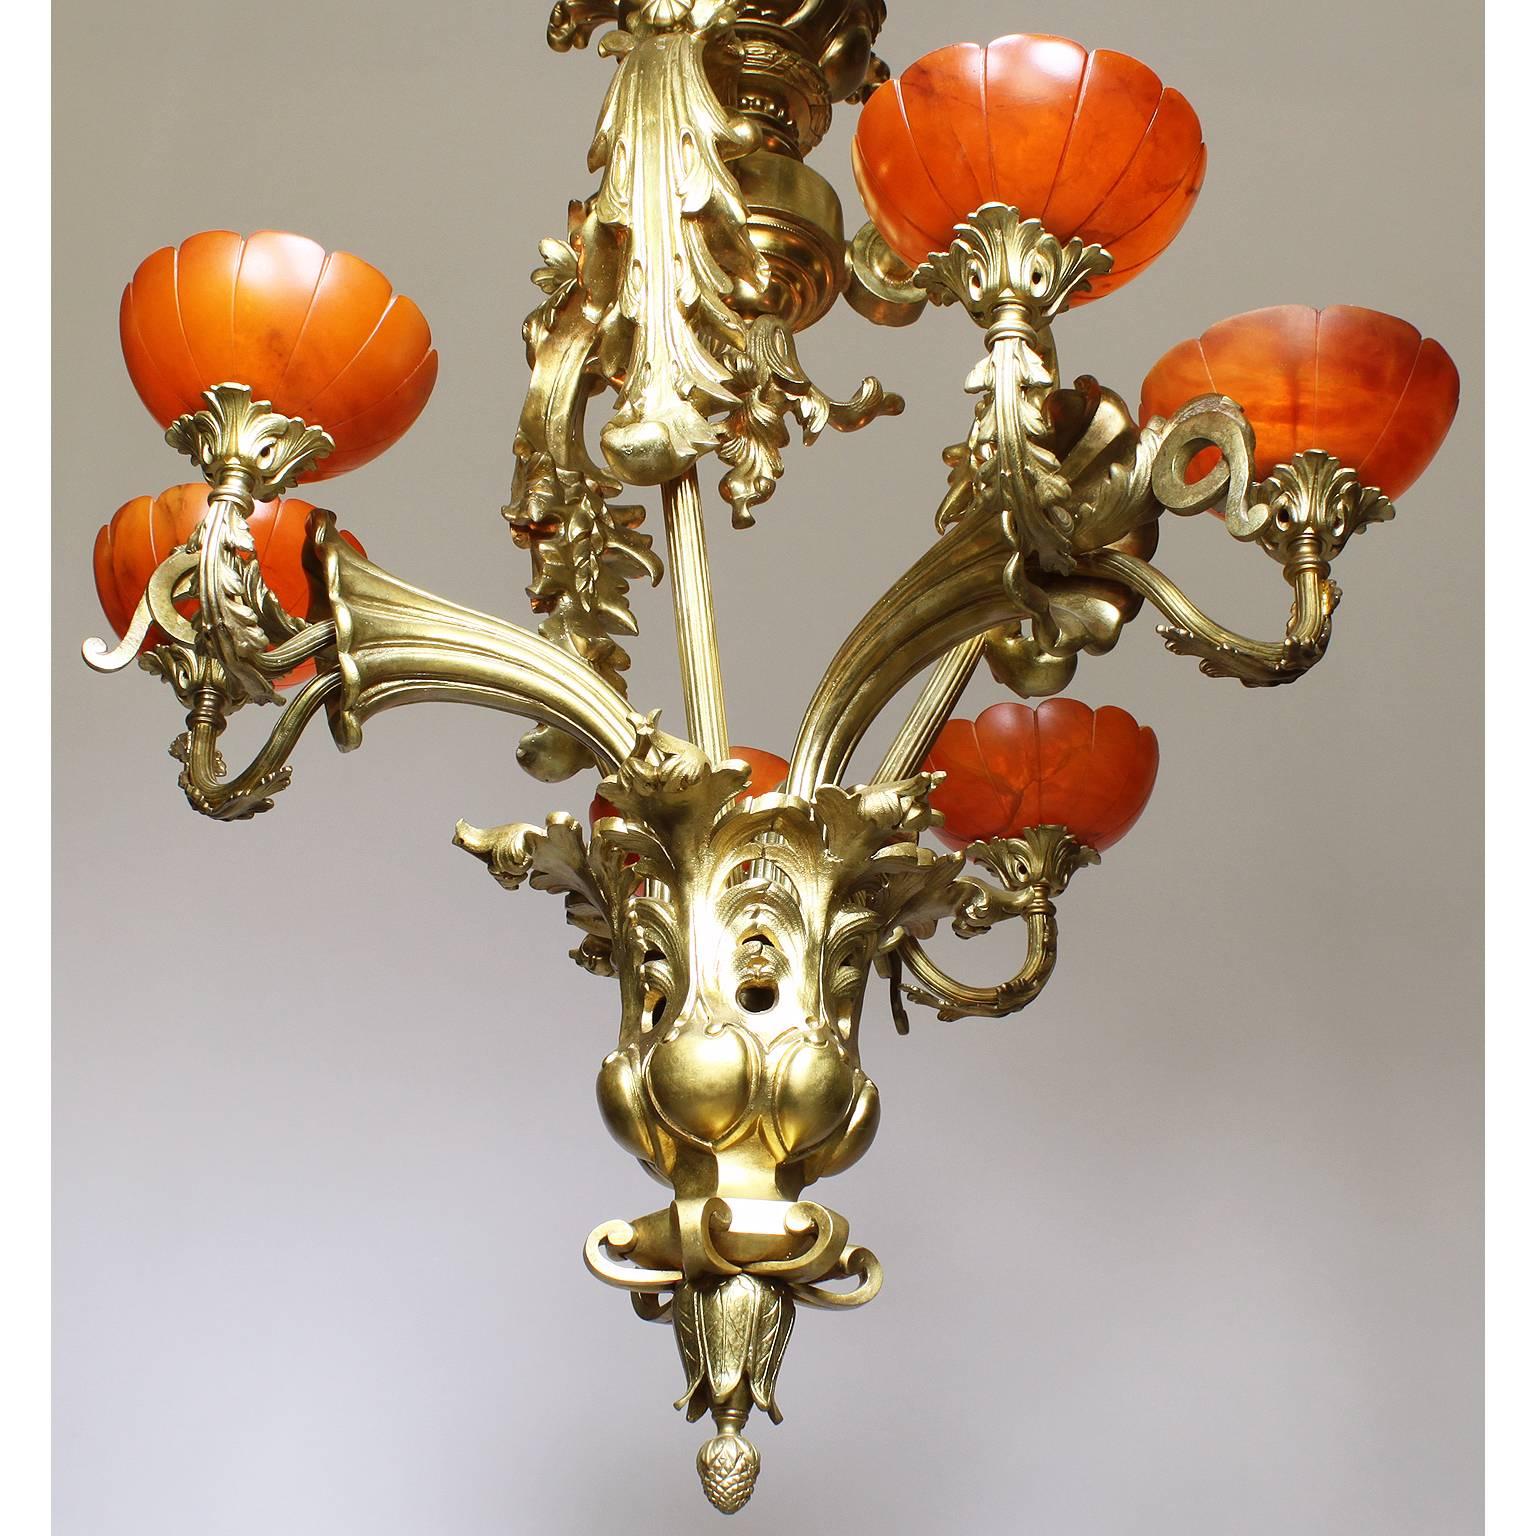 French Belle Époque Early 20th Century Gilt-Bronze & Alabaster Lilies Chandelier For Sale 3